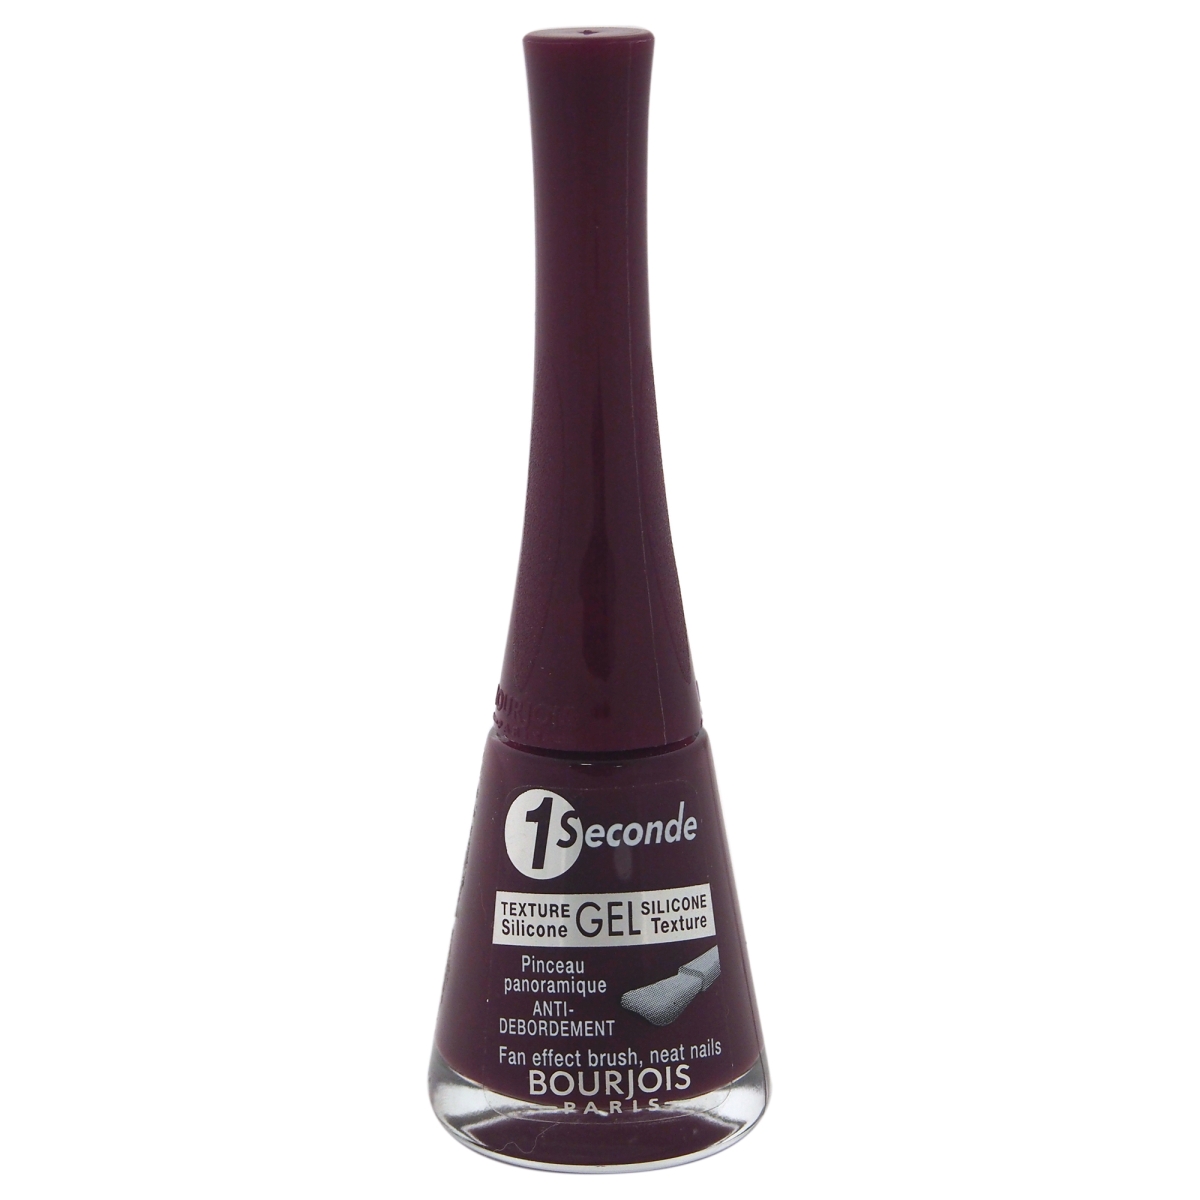 W-c-9664 0.3 Oz No. 12 1 Seconde Rouge Obscur Nail Polish For Women